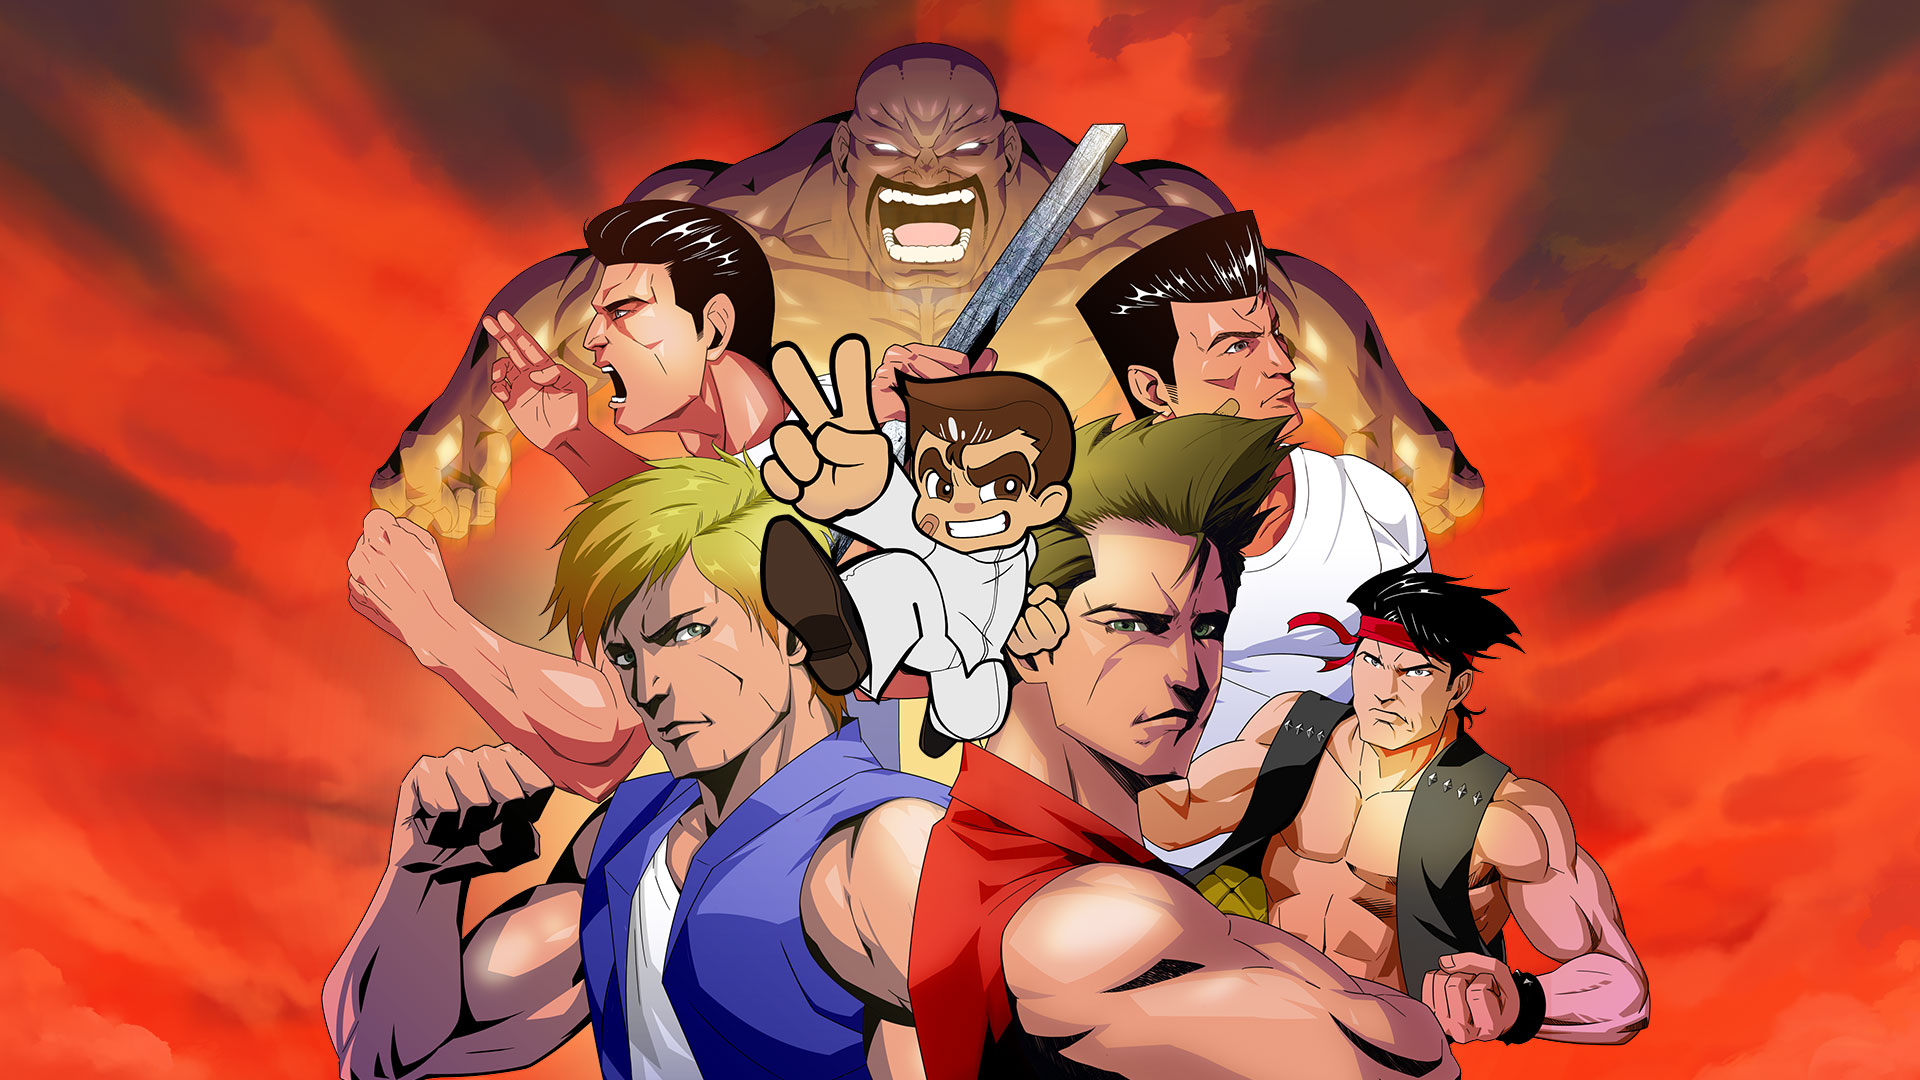 DOUBLE DRAGON & Kunio-kun Retro Brawler Bundle brings 18 classic games to the west later this month!